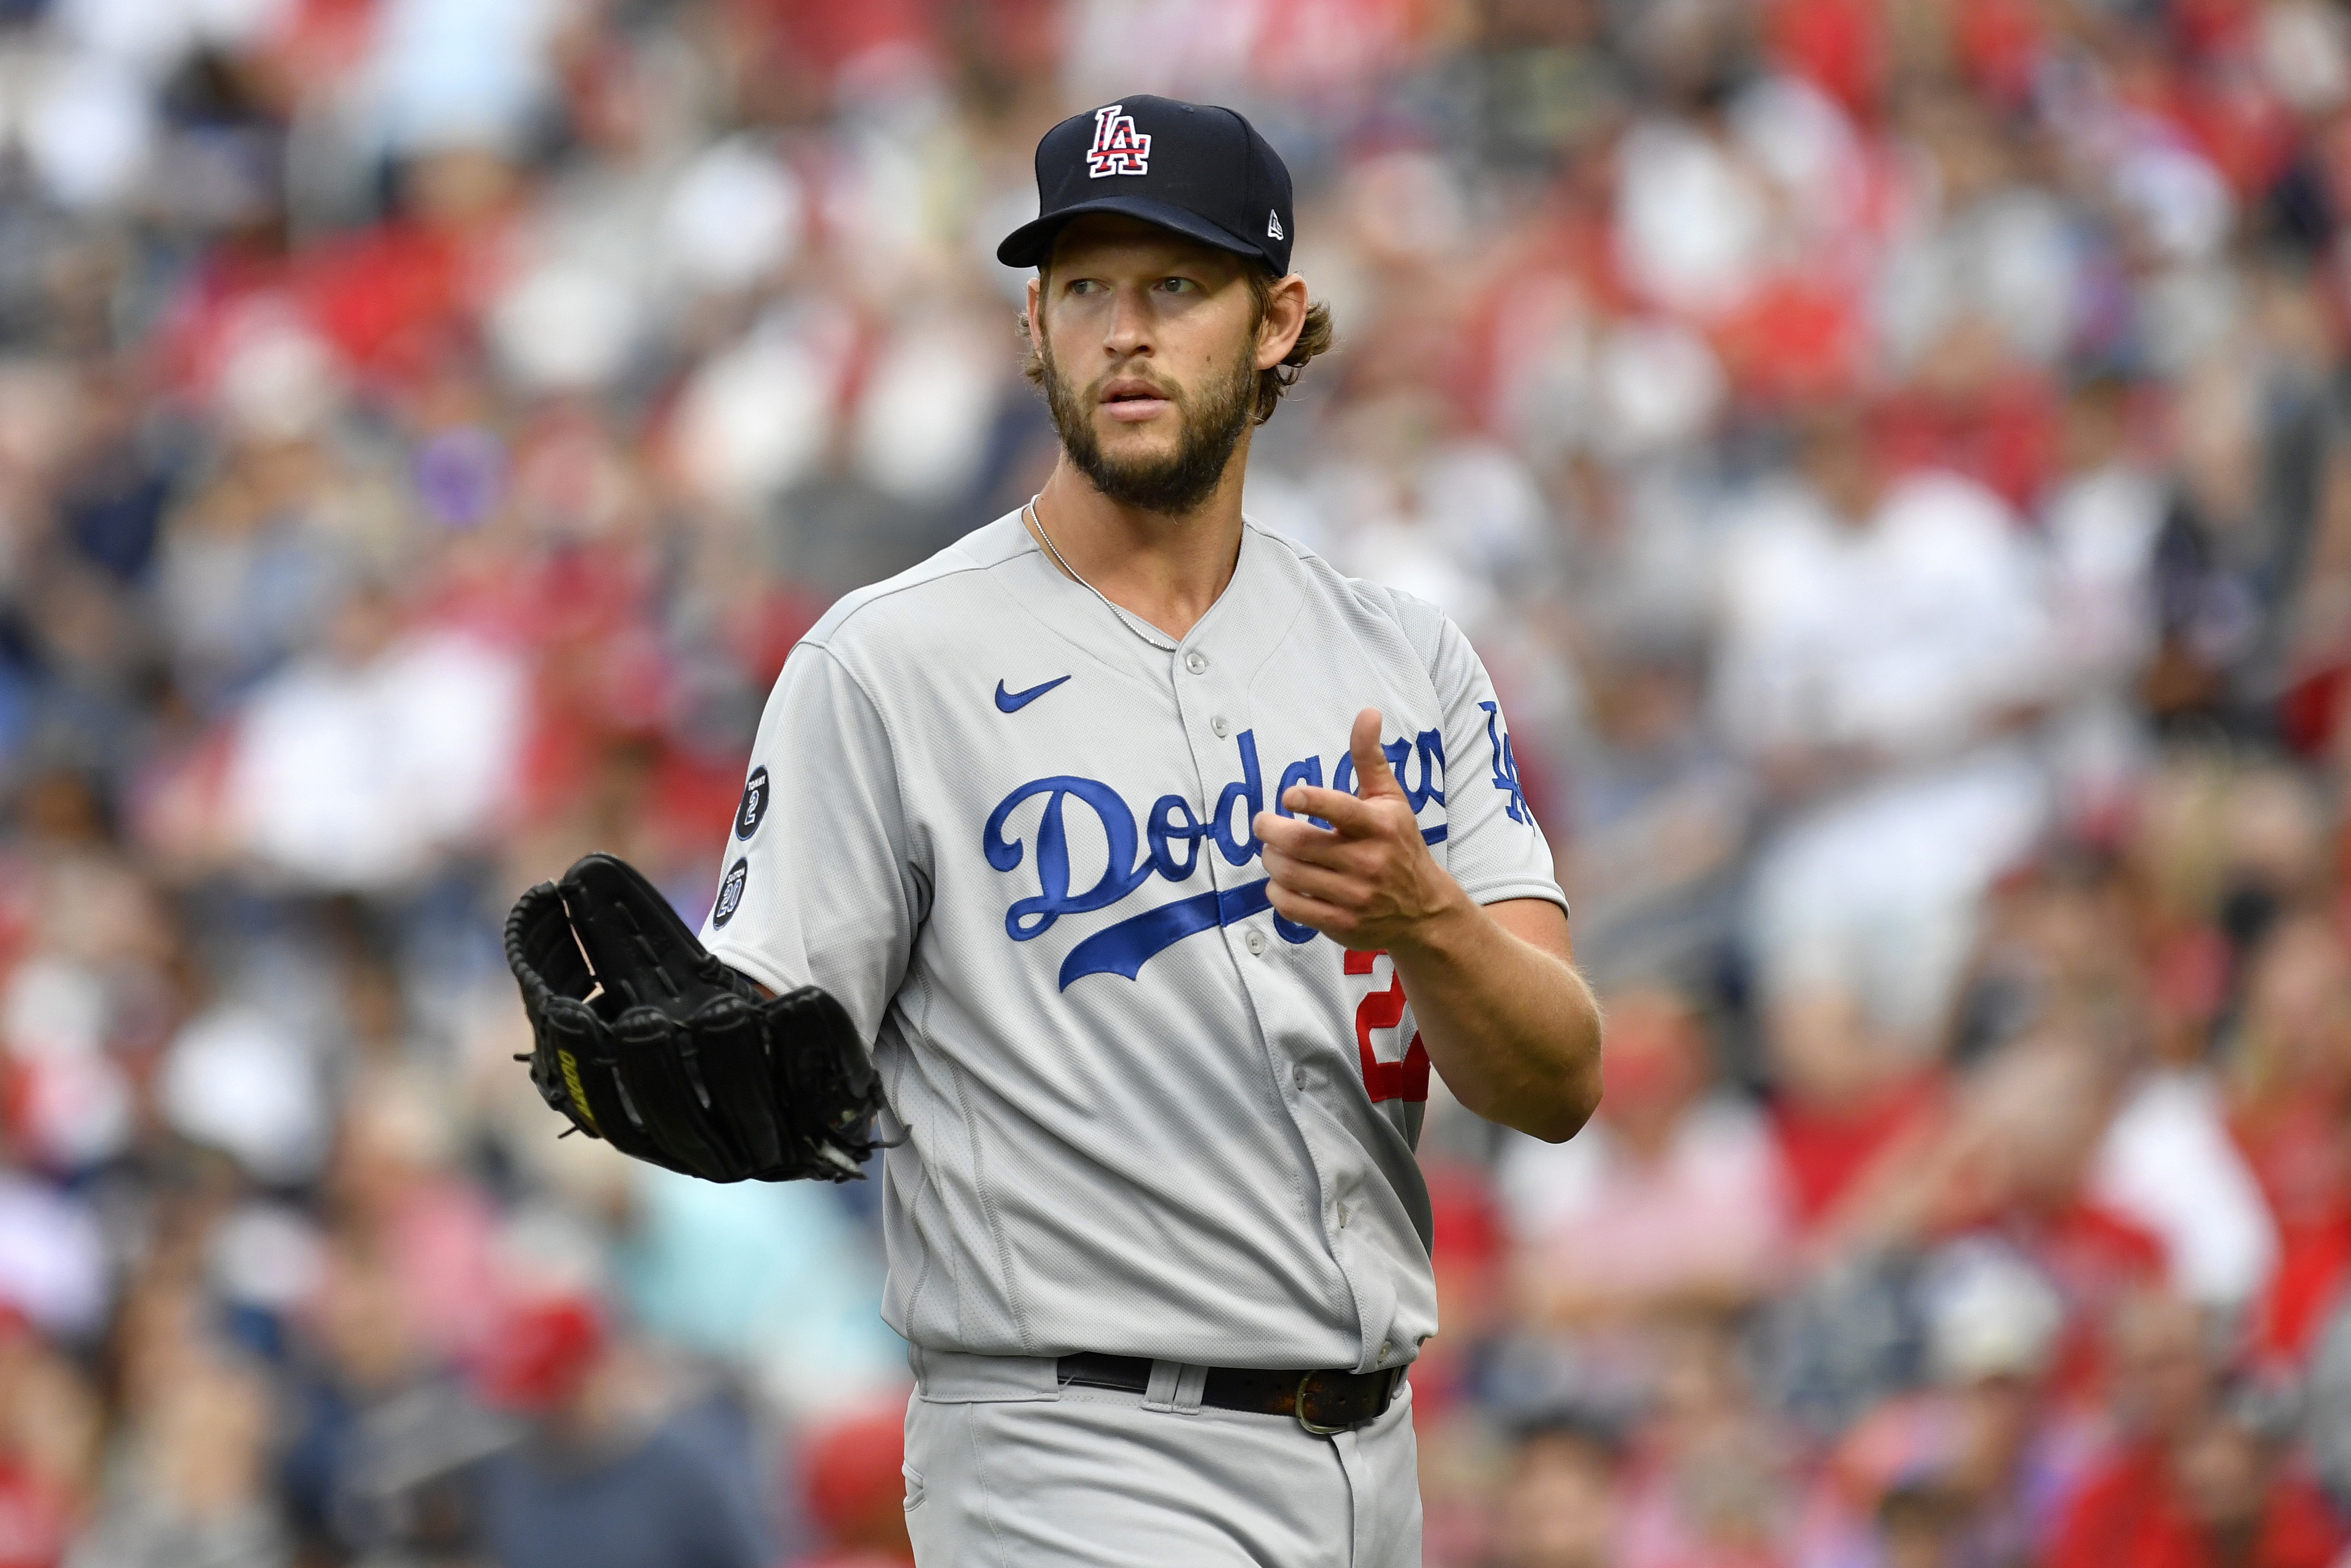 Clayton Kershaw returning to Dodgers on one-year, $17M deal